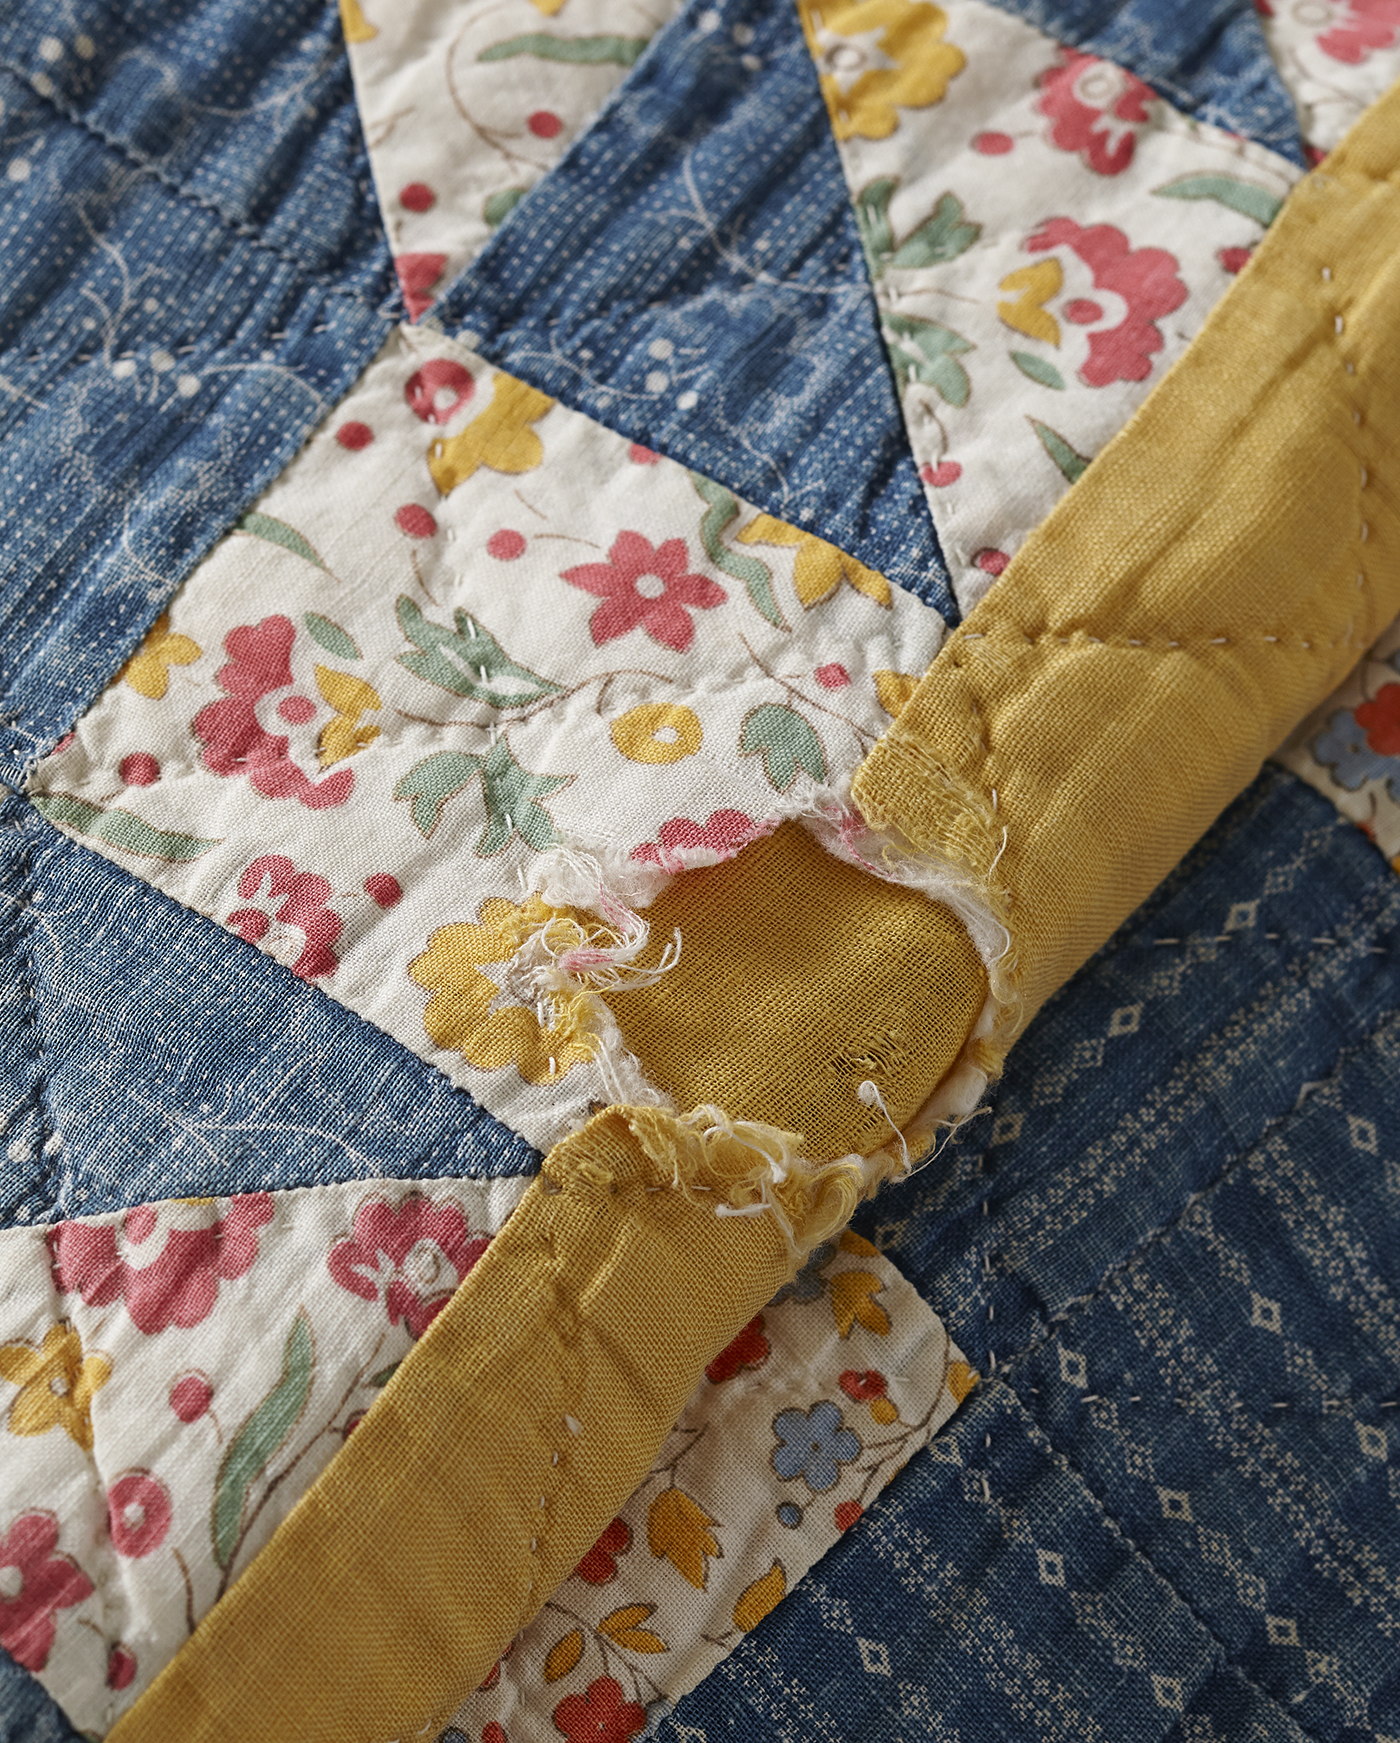 How To Tell If A Quilt Is Valuable